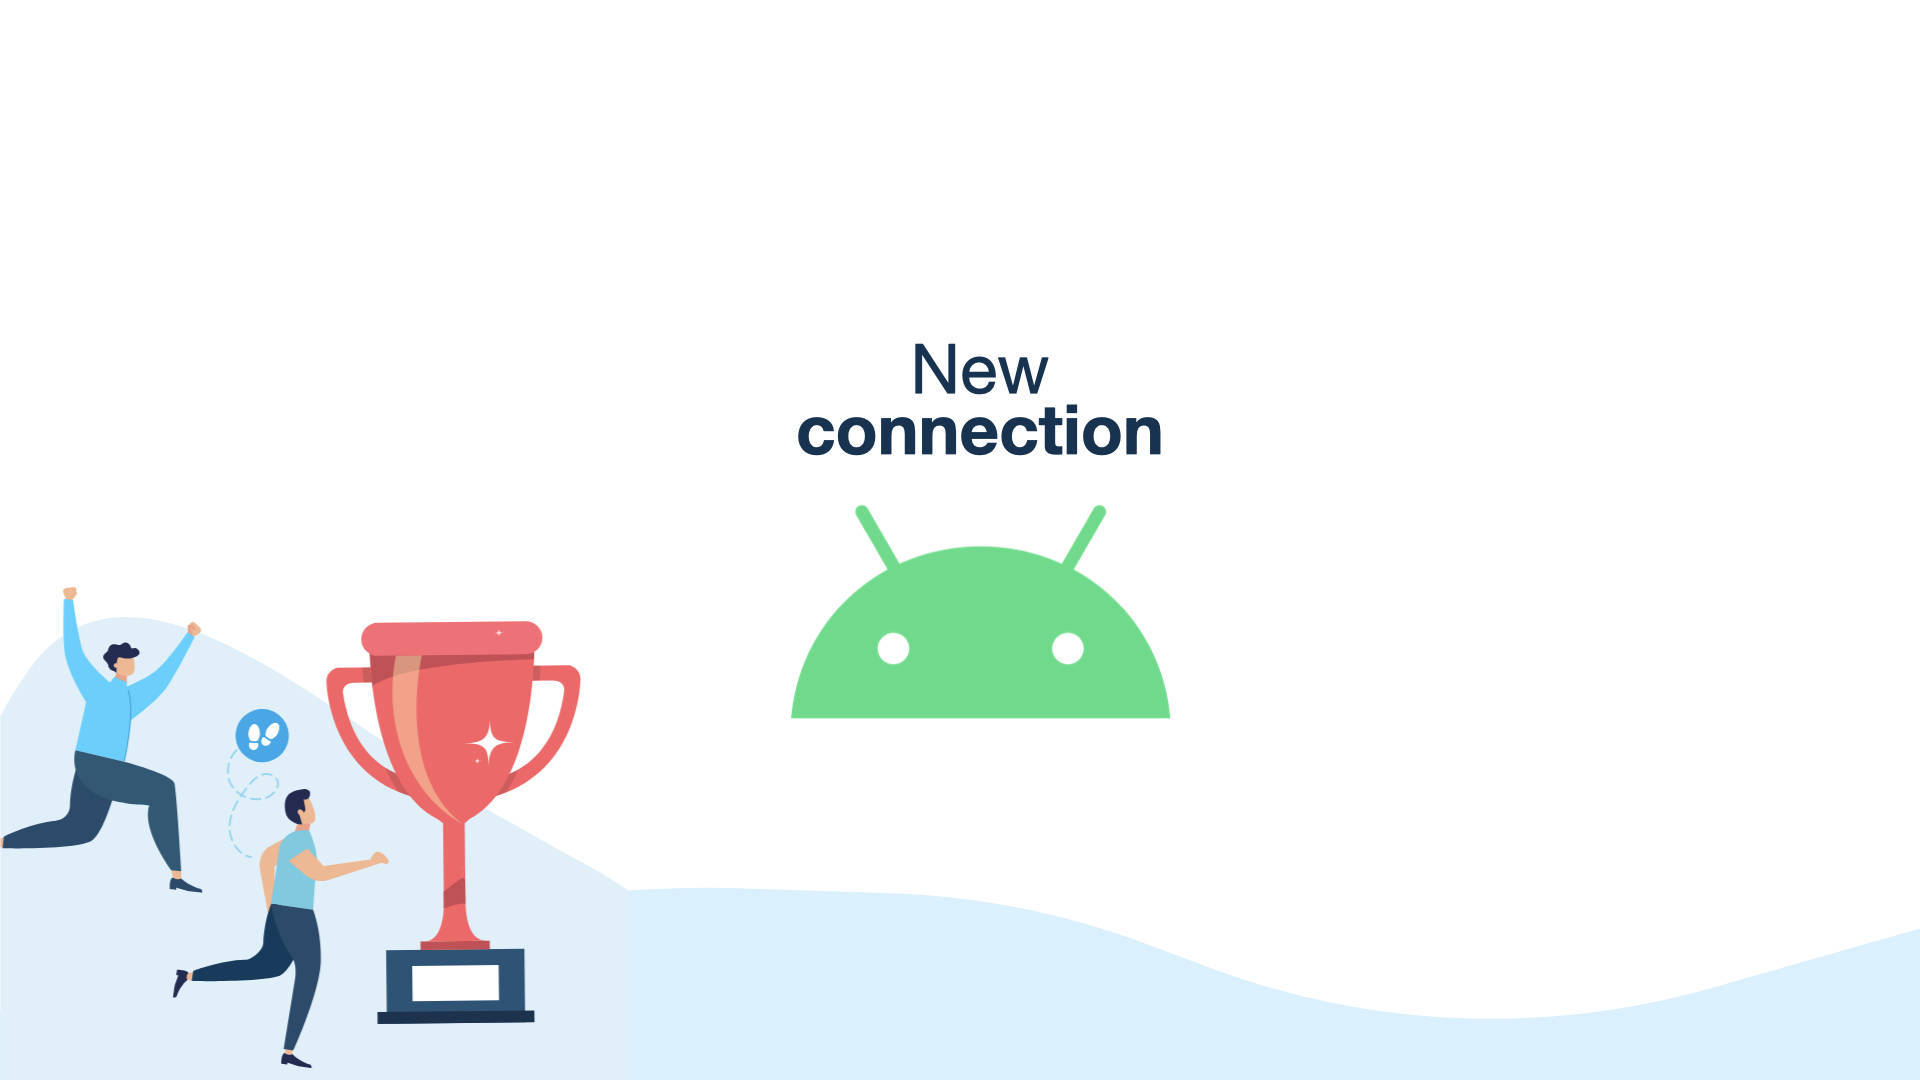 New connection: Android SDK